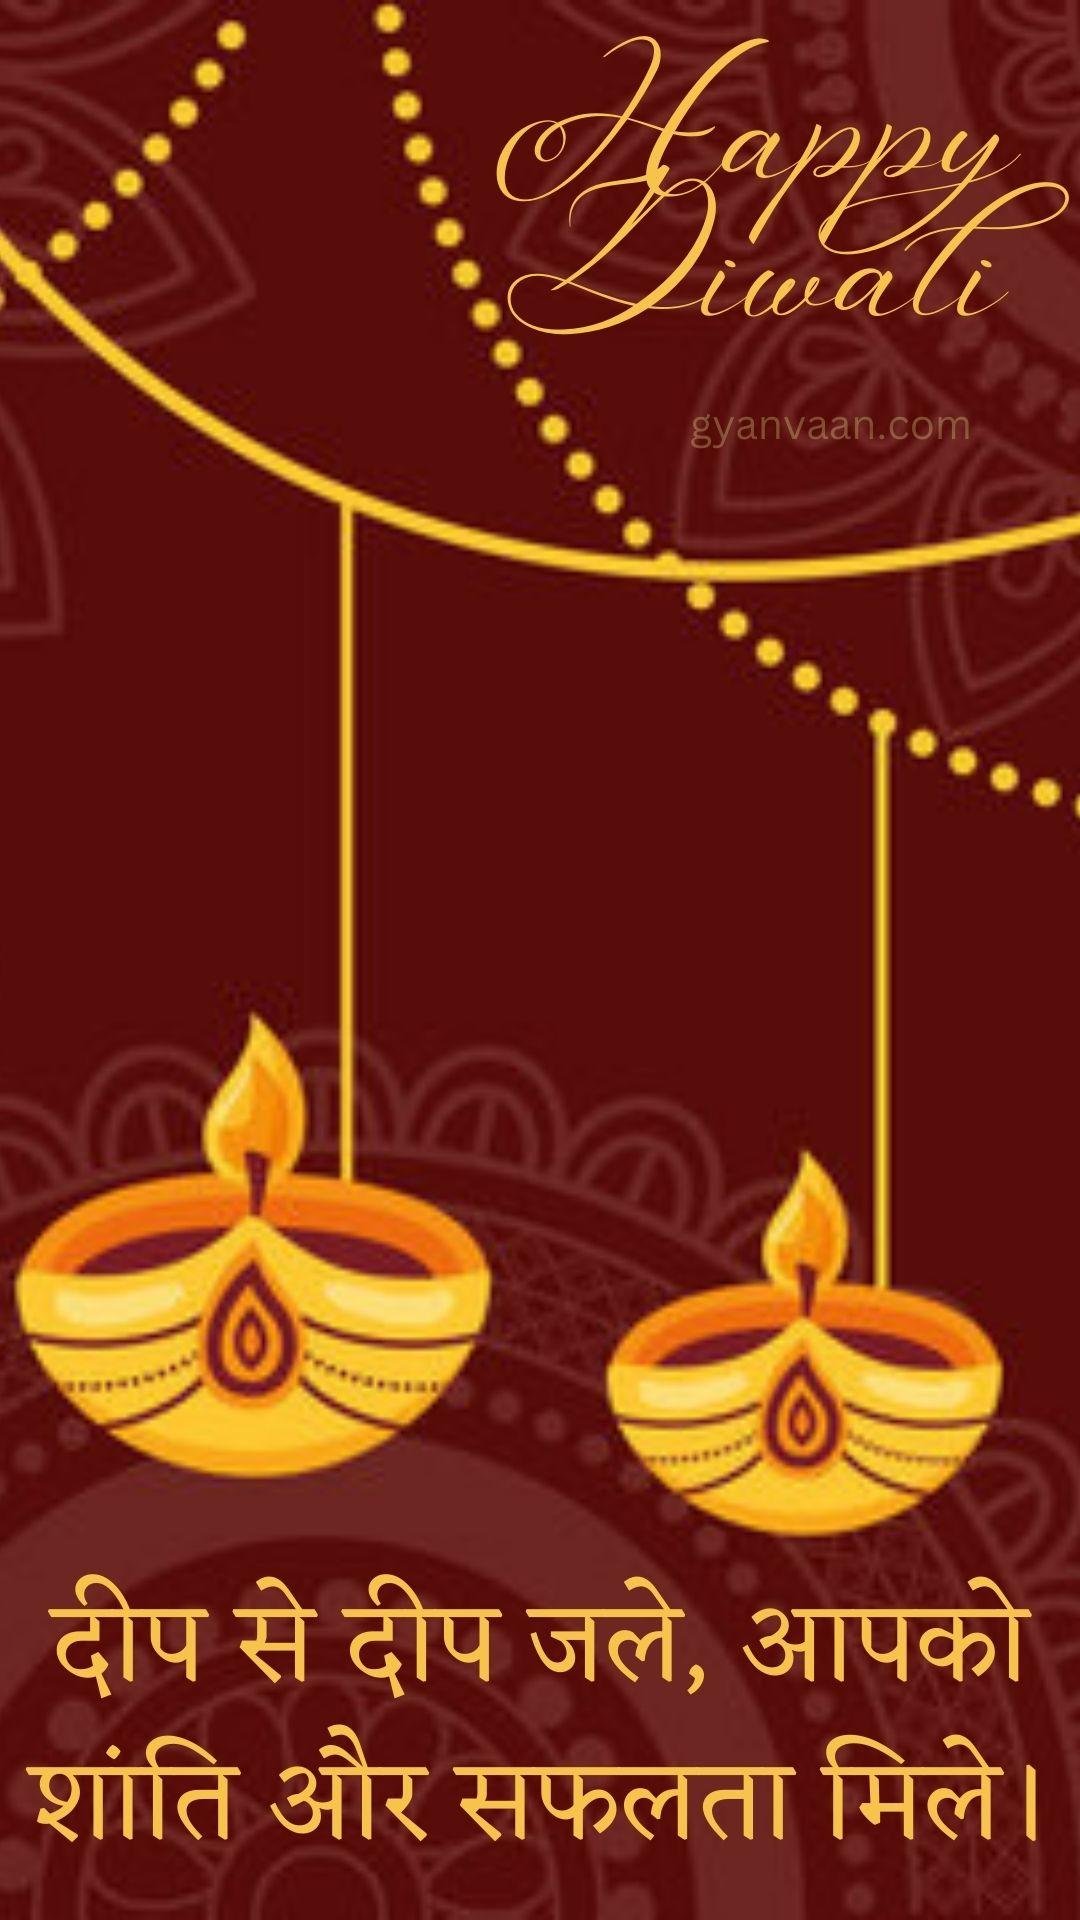 Diwali Quotes In Hindi With Wishes7 - Diwali Quotes In Hindi